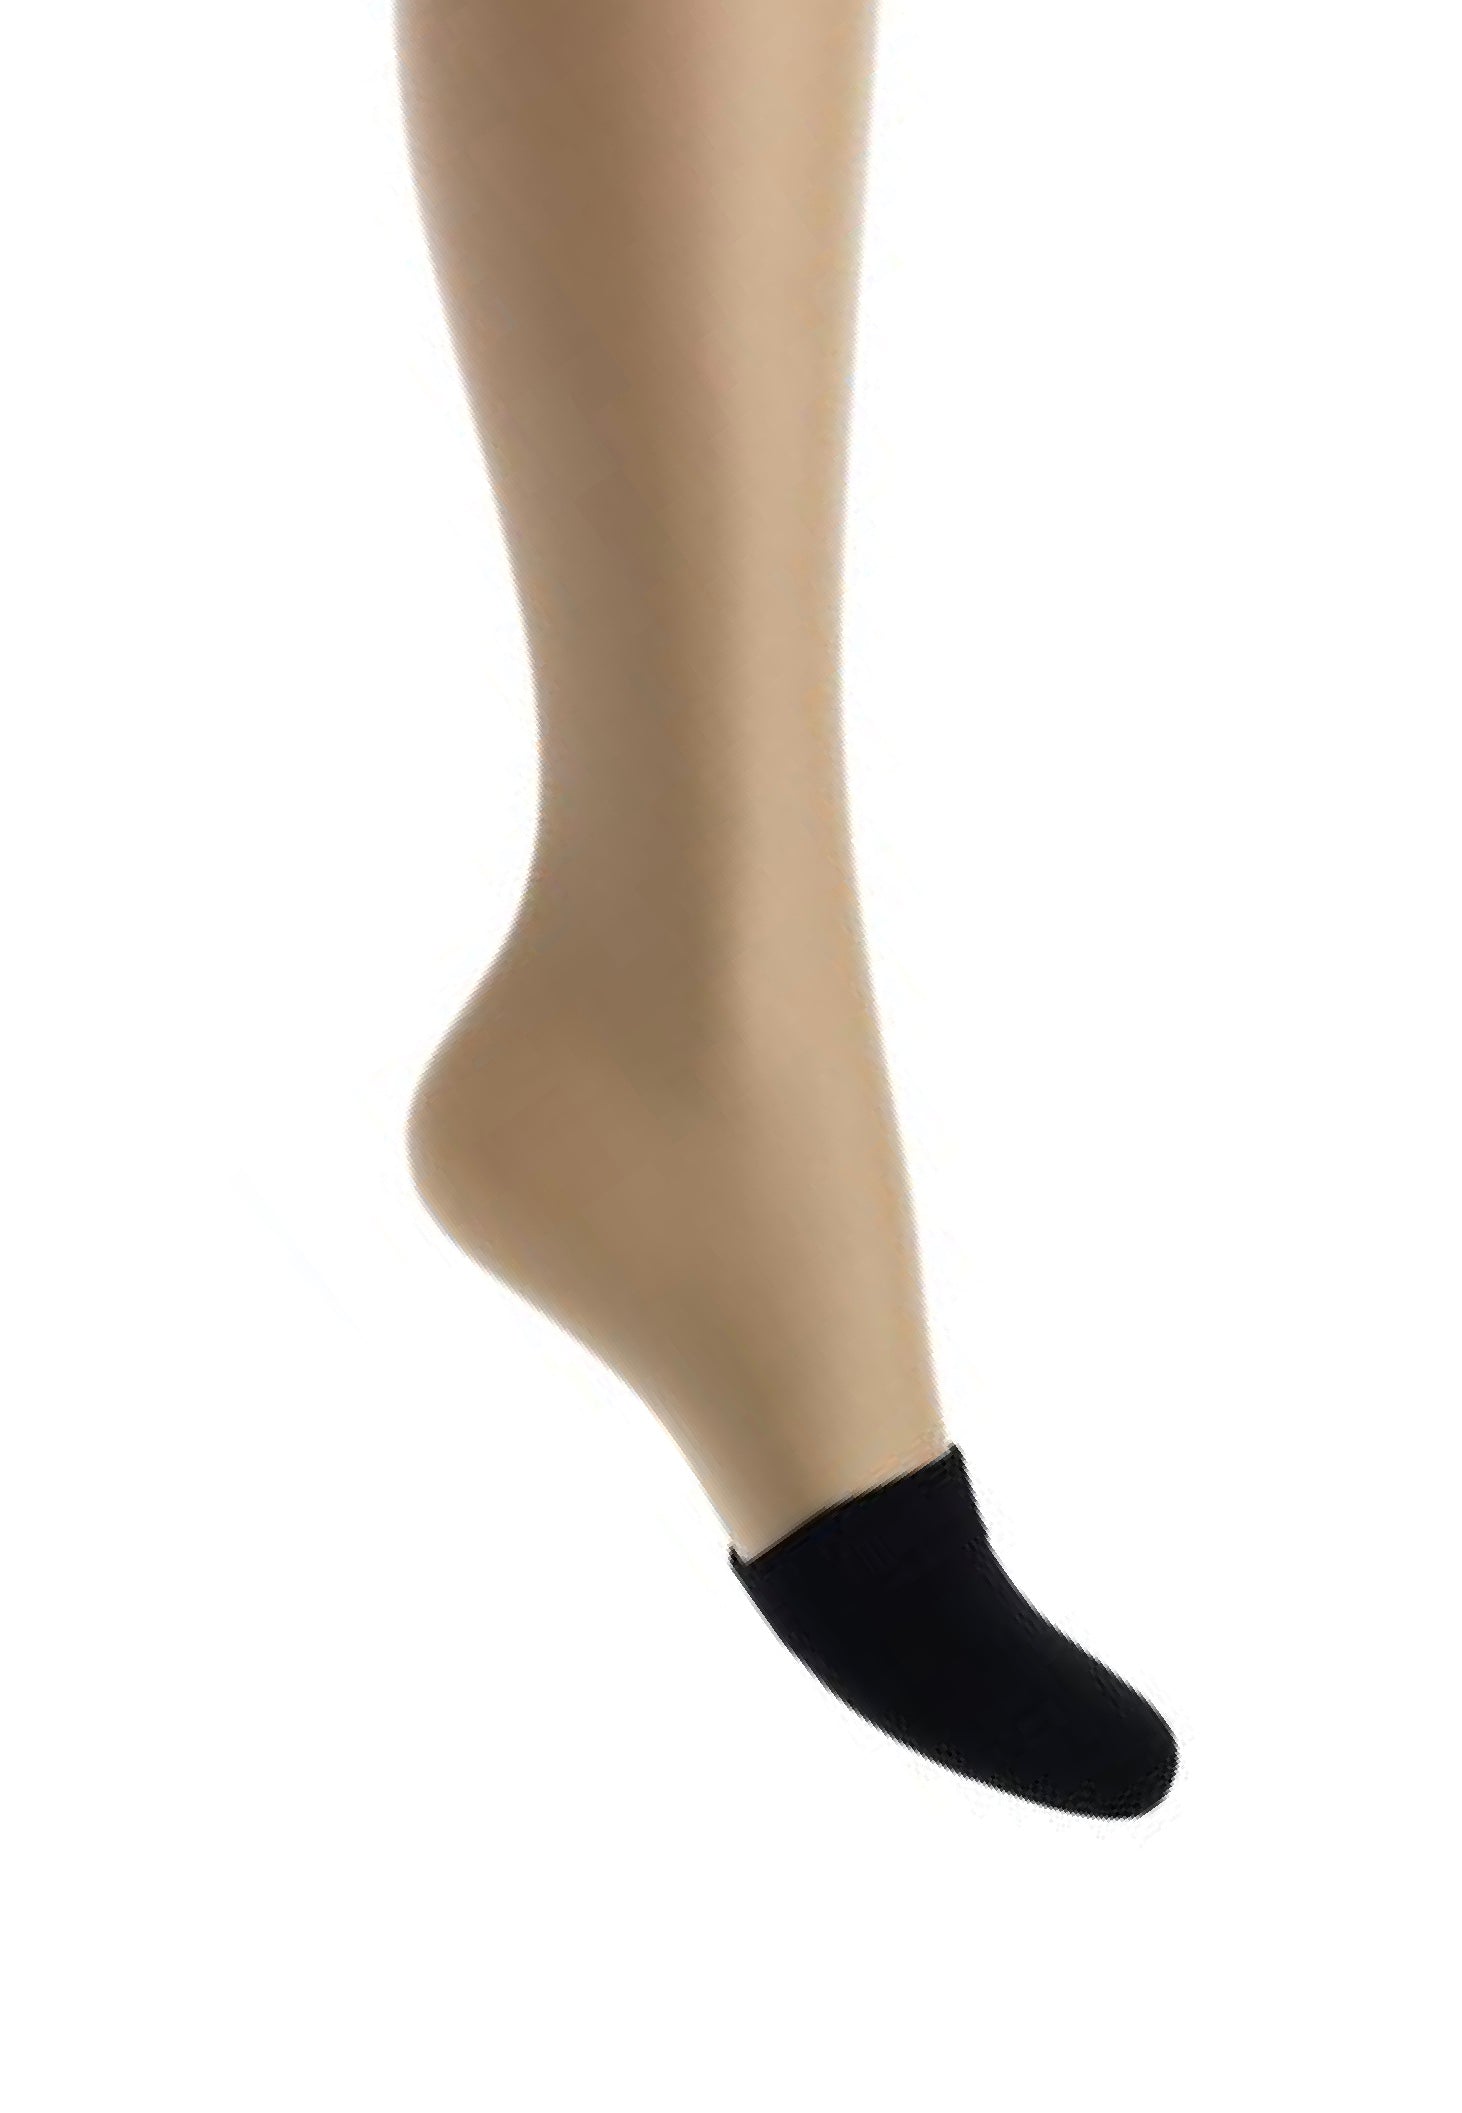 Bonnie Doon Toe Cover BE311000 - black cotton toe sock perfect for wearing with mules or sling back shoes